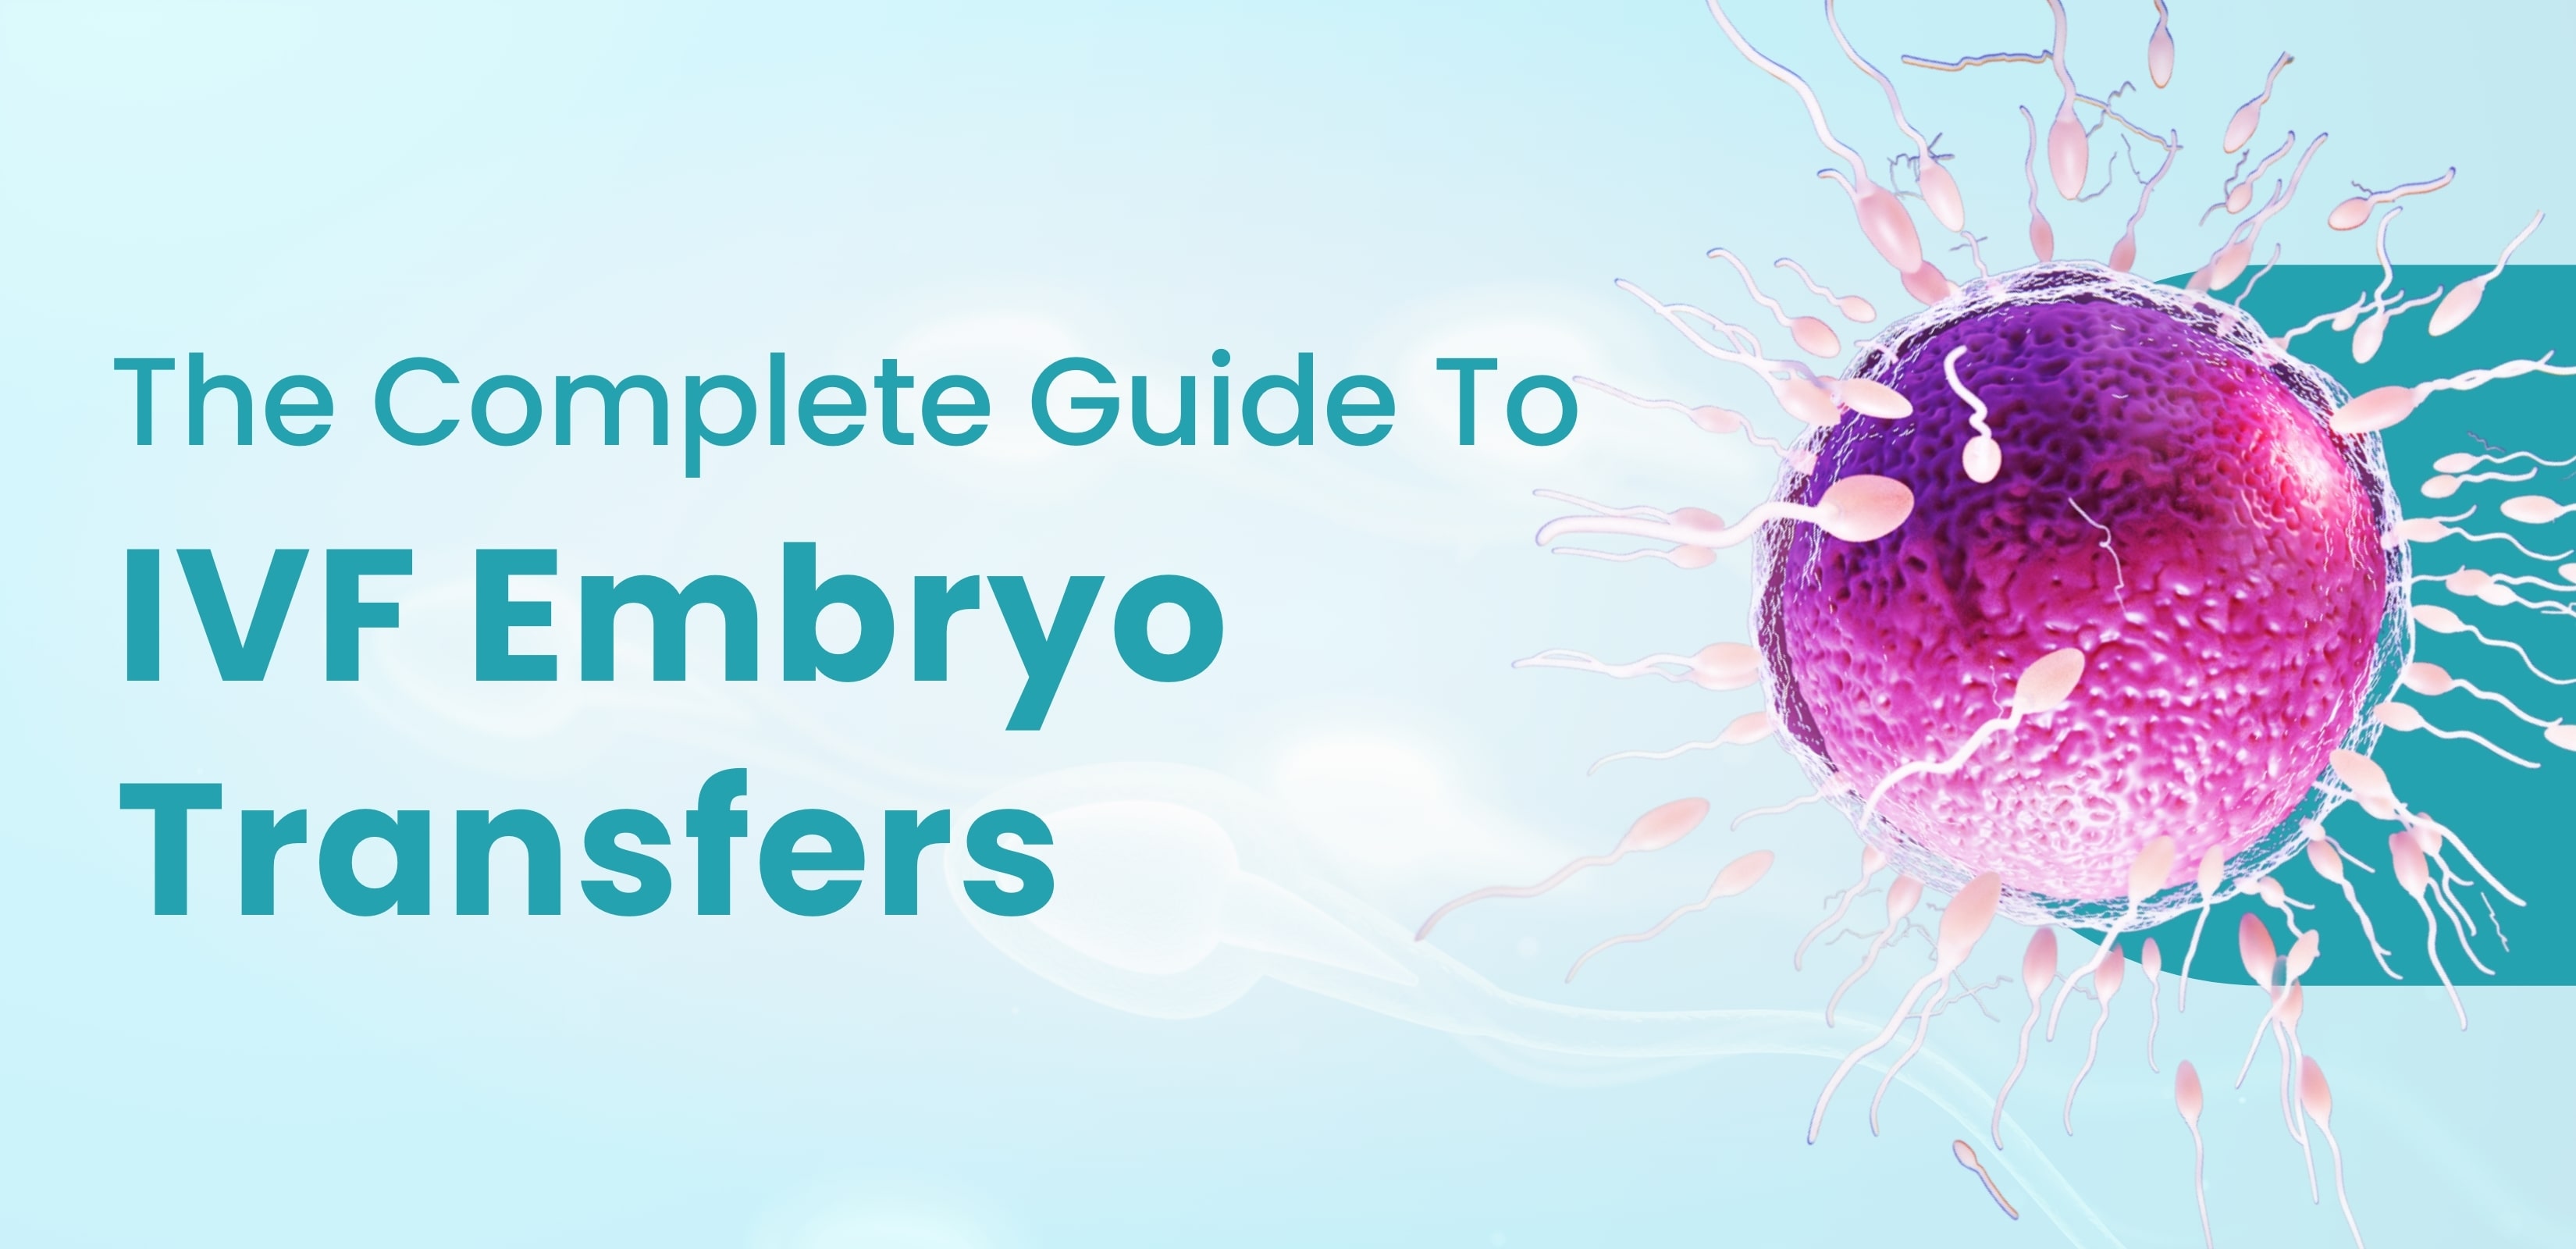 The Complete Guide To IVF Embryo Transfers